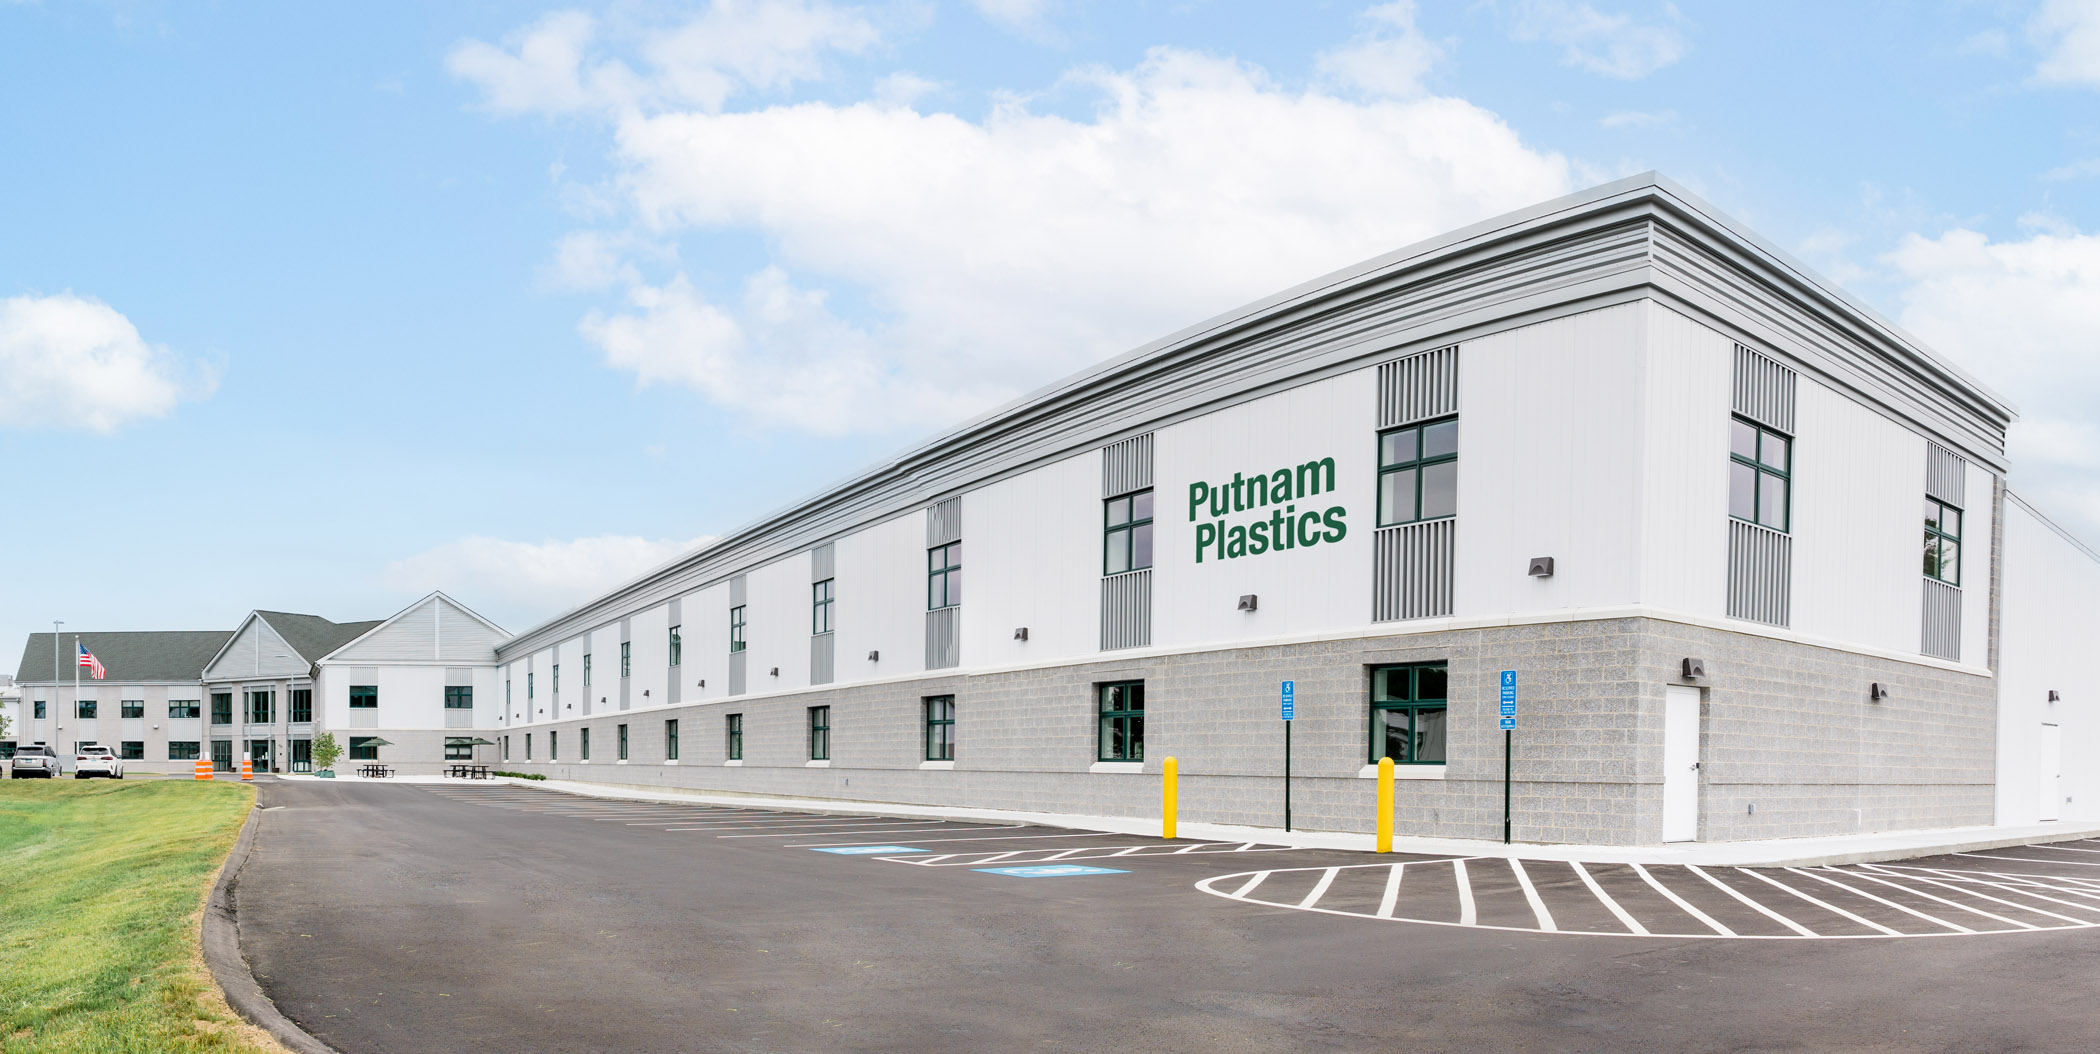 Putnam Plastics Corporation has completed expansion of its facility in Connecticut, USA.